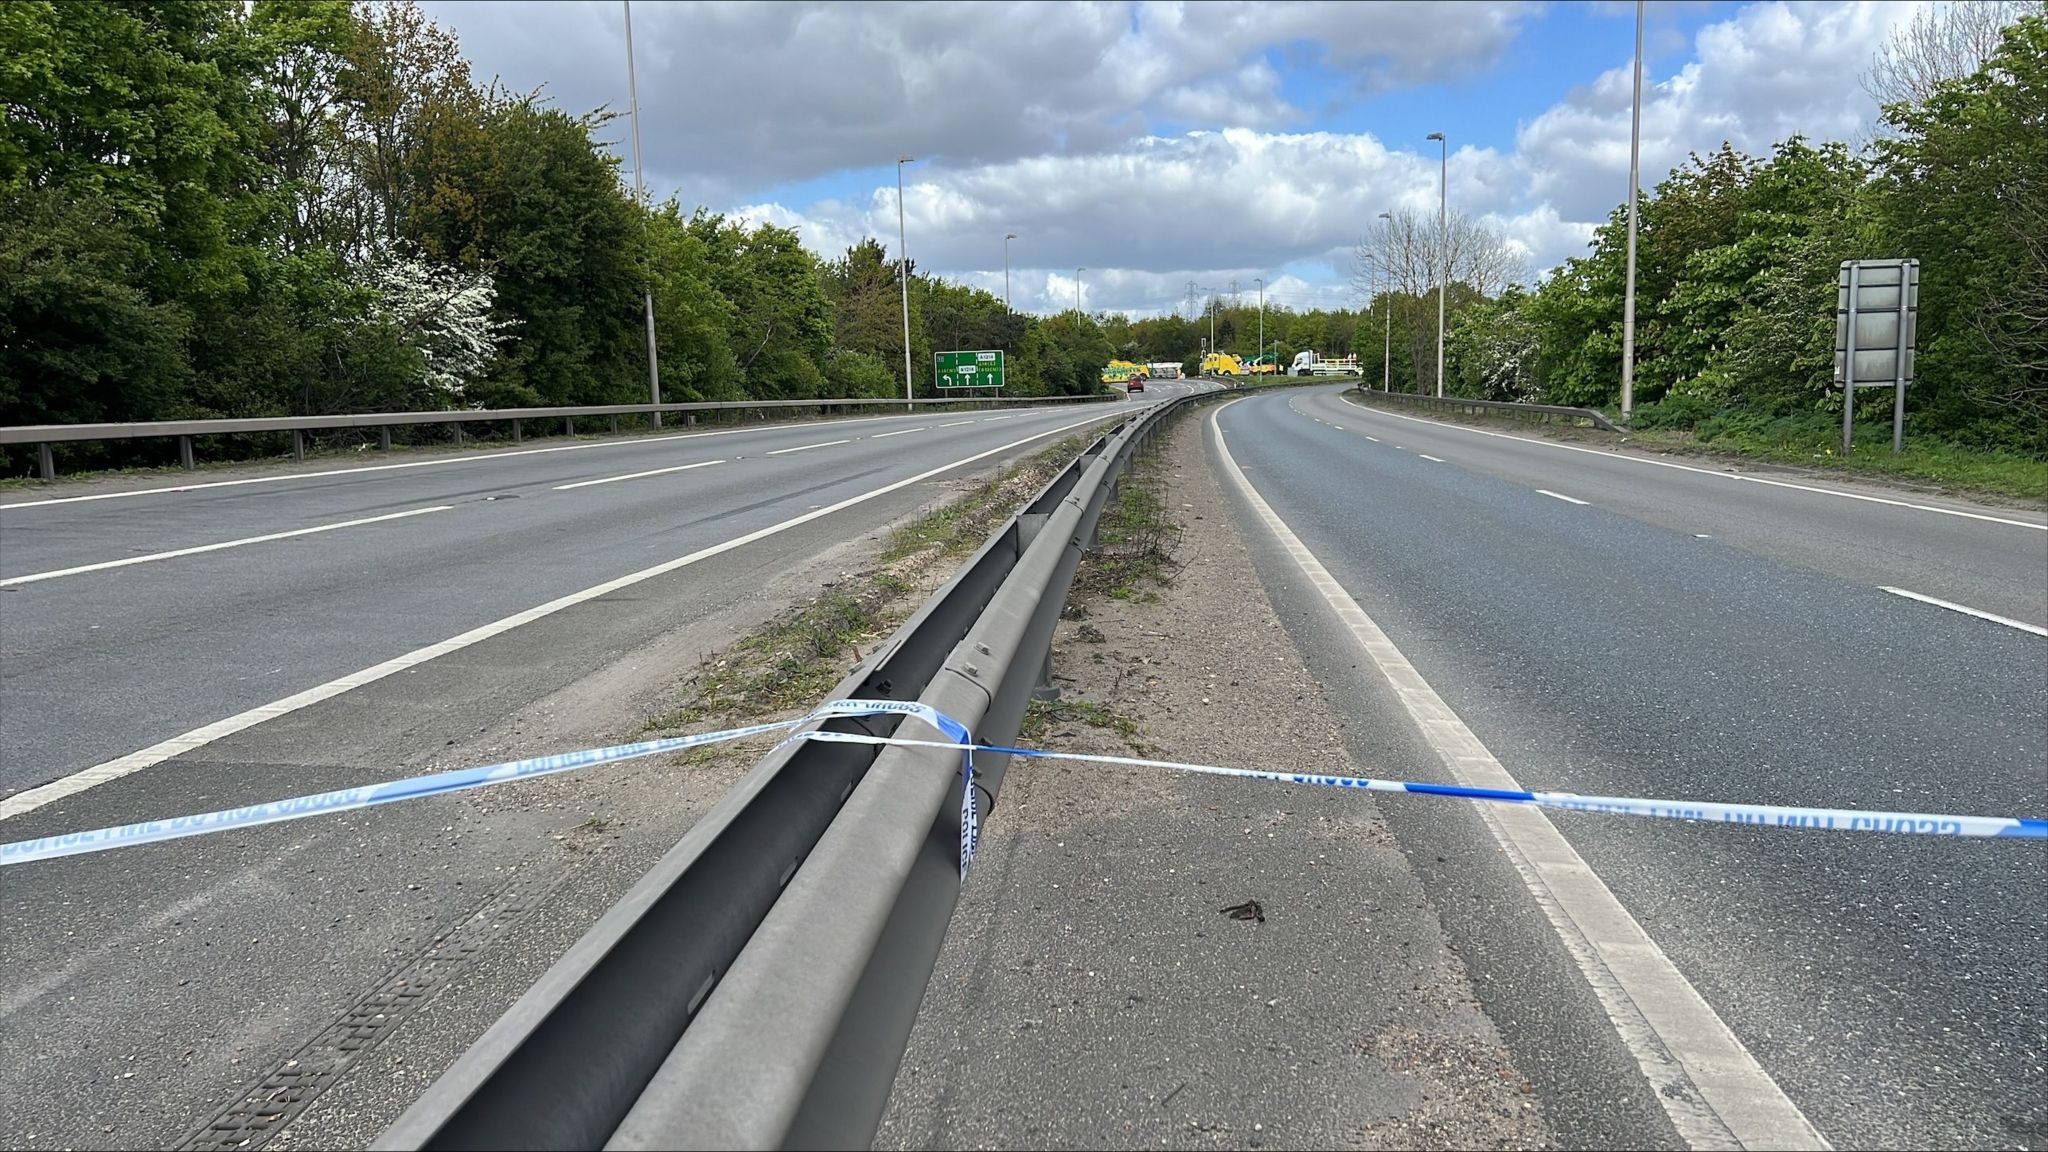 A police cordon has been put in place on the A14 after a serious crash